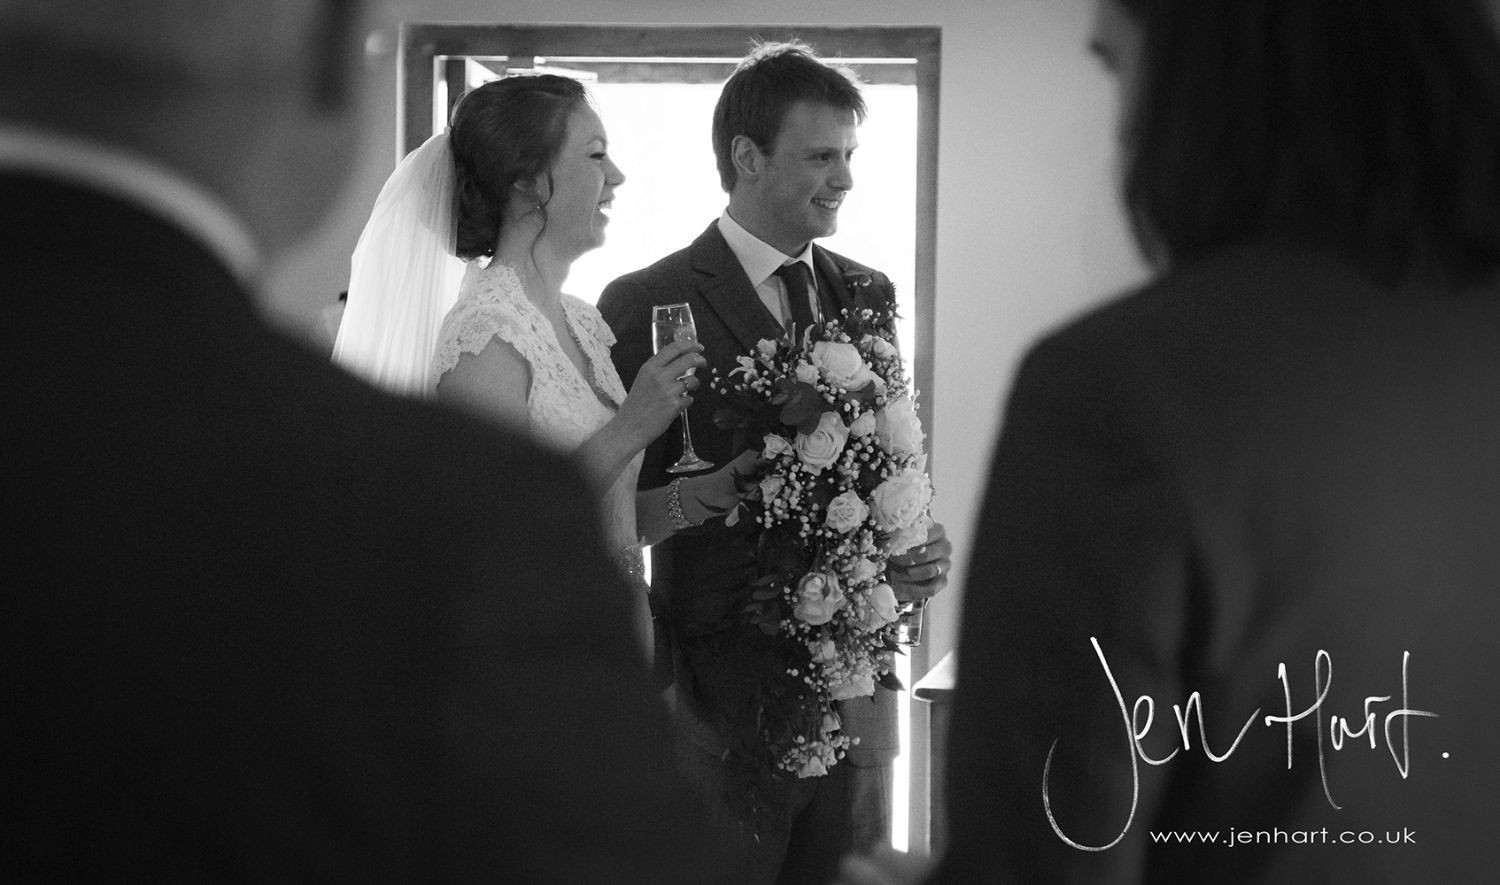 Photograph-Wedding-Whinstone-View_02May15_173